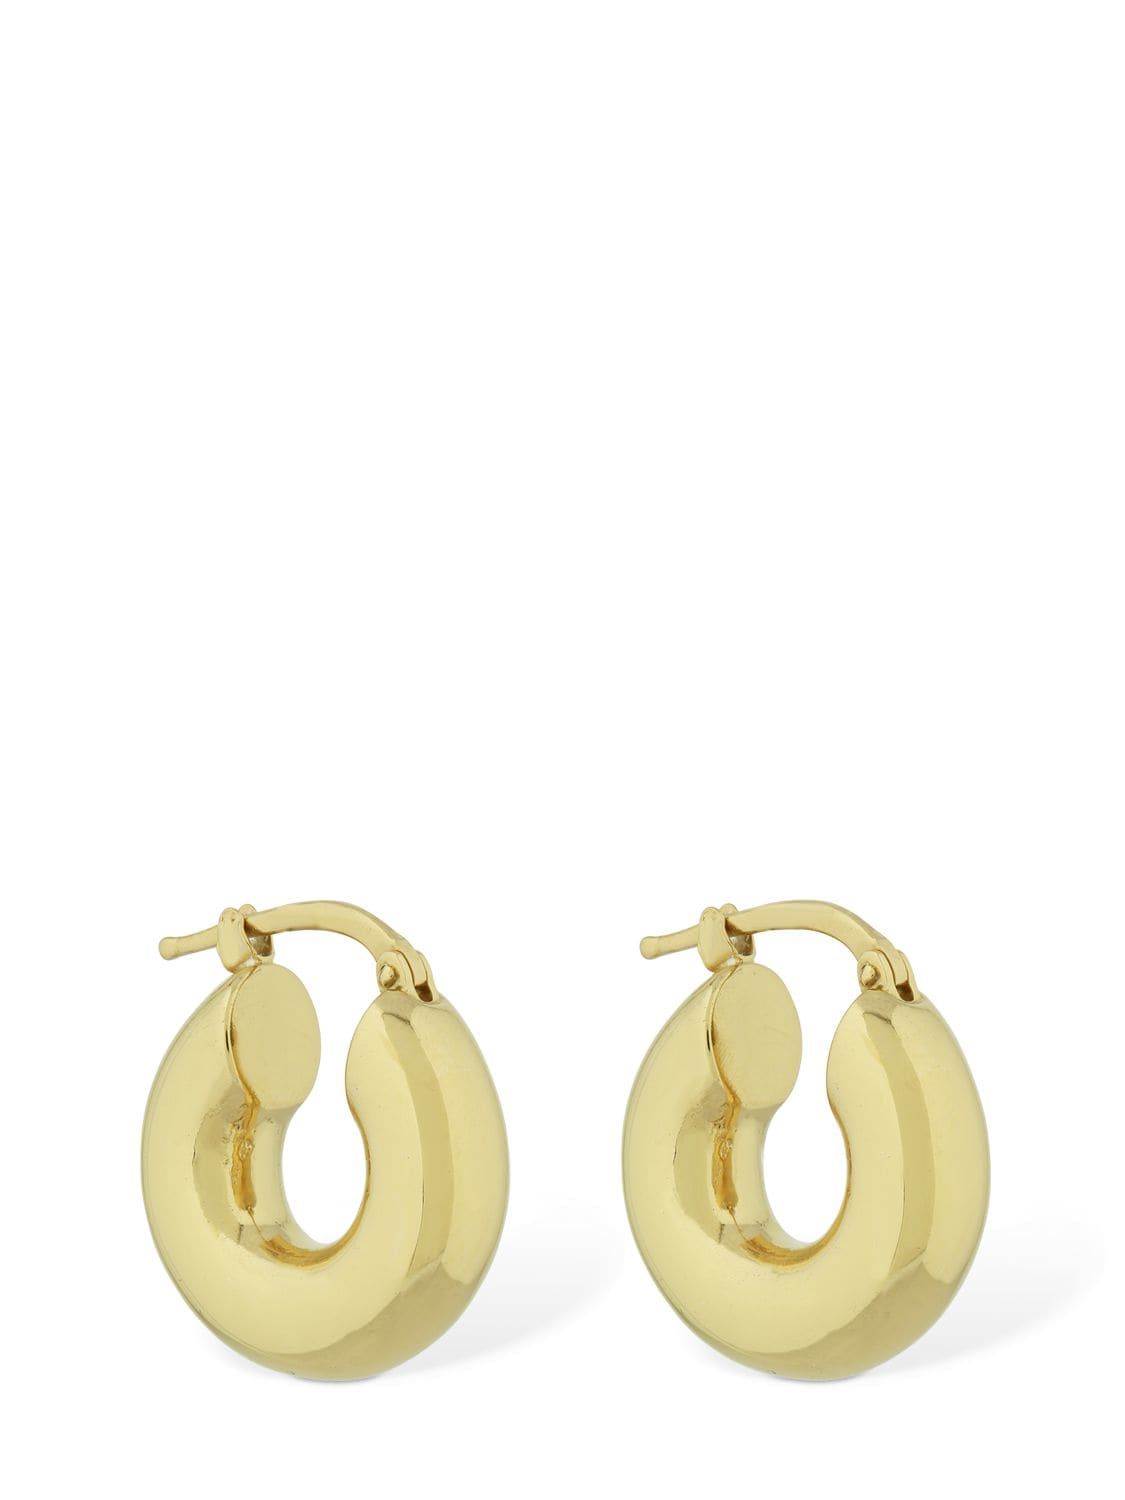 Image of Classic Round Earrings